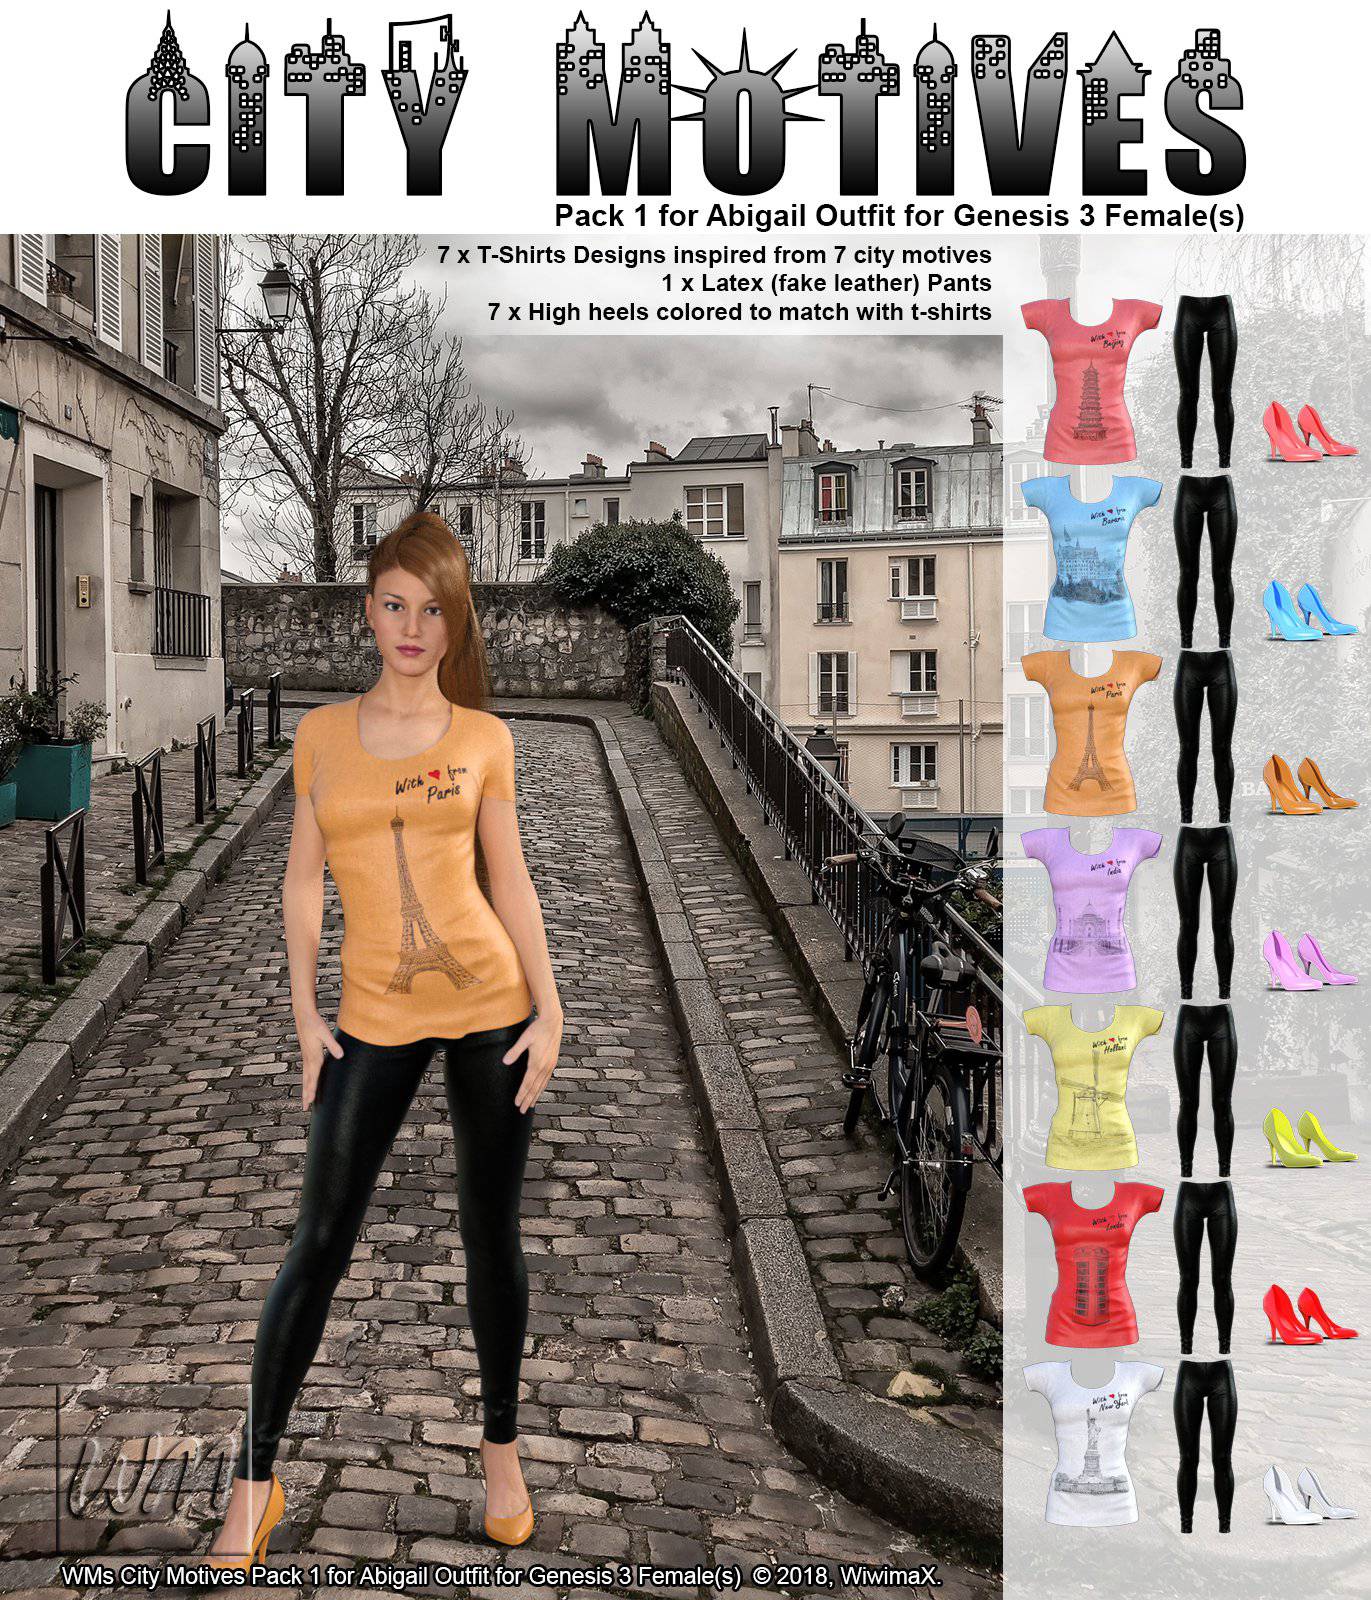 WMs City Motives Pack 1 for Abigail Outfit for Genesis 3 Females_DAZ3D下载站